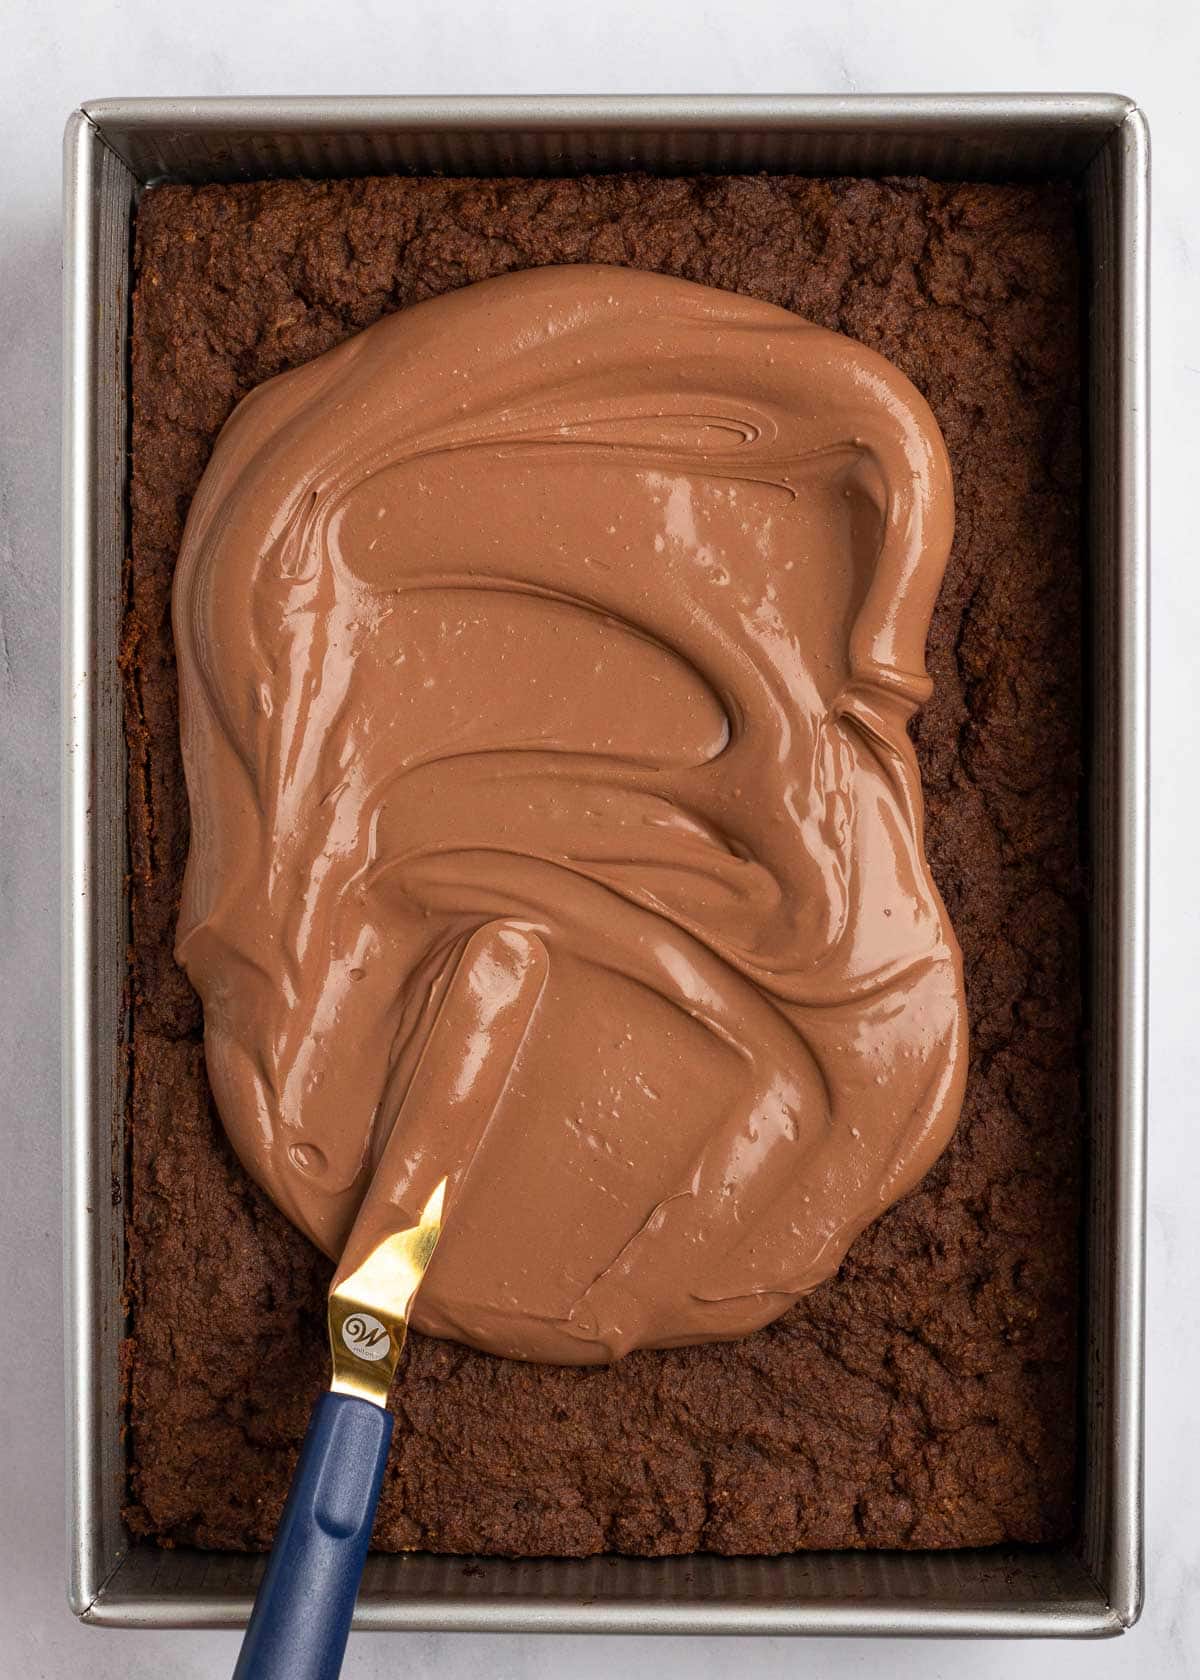 An offset spatula evening out chocolate frosting on a chocolate cake